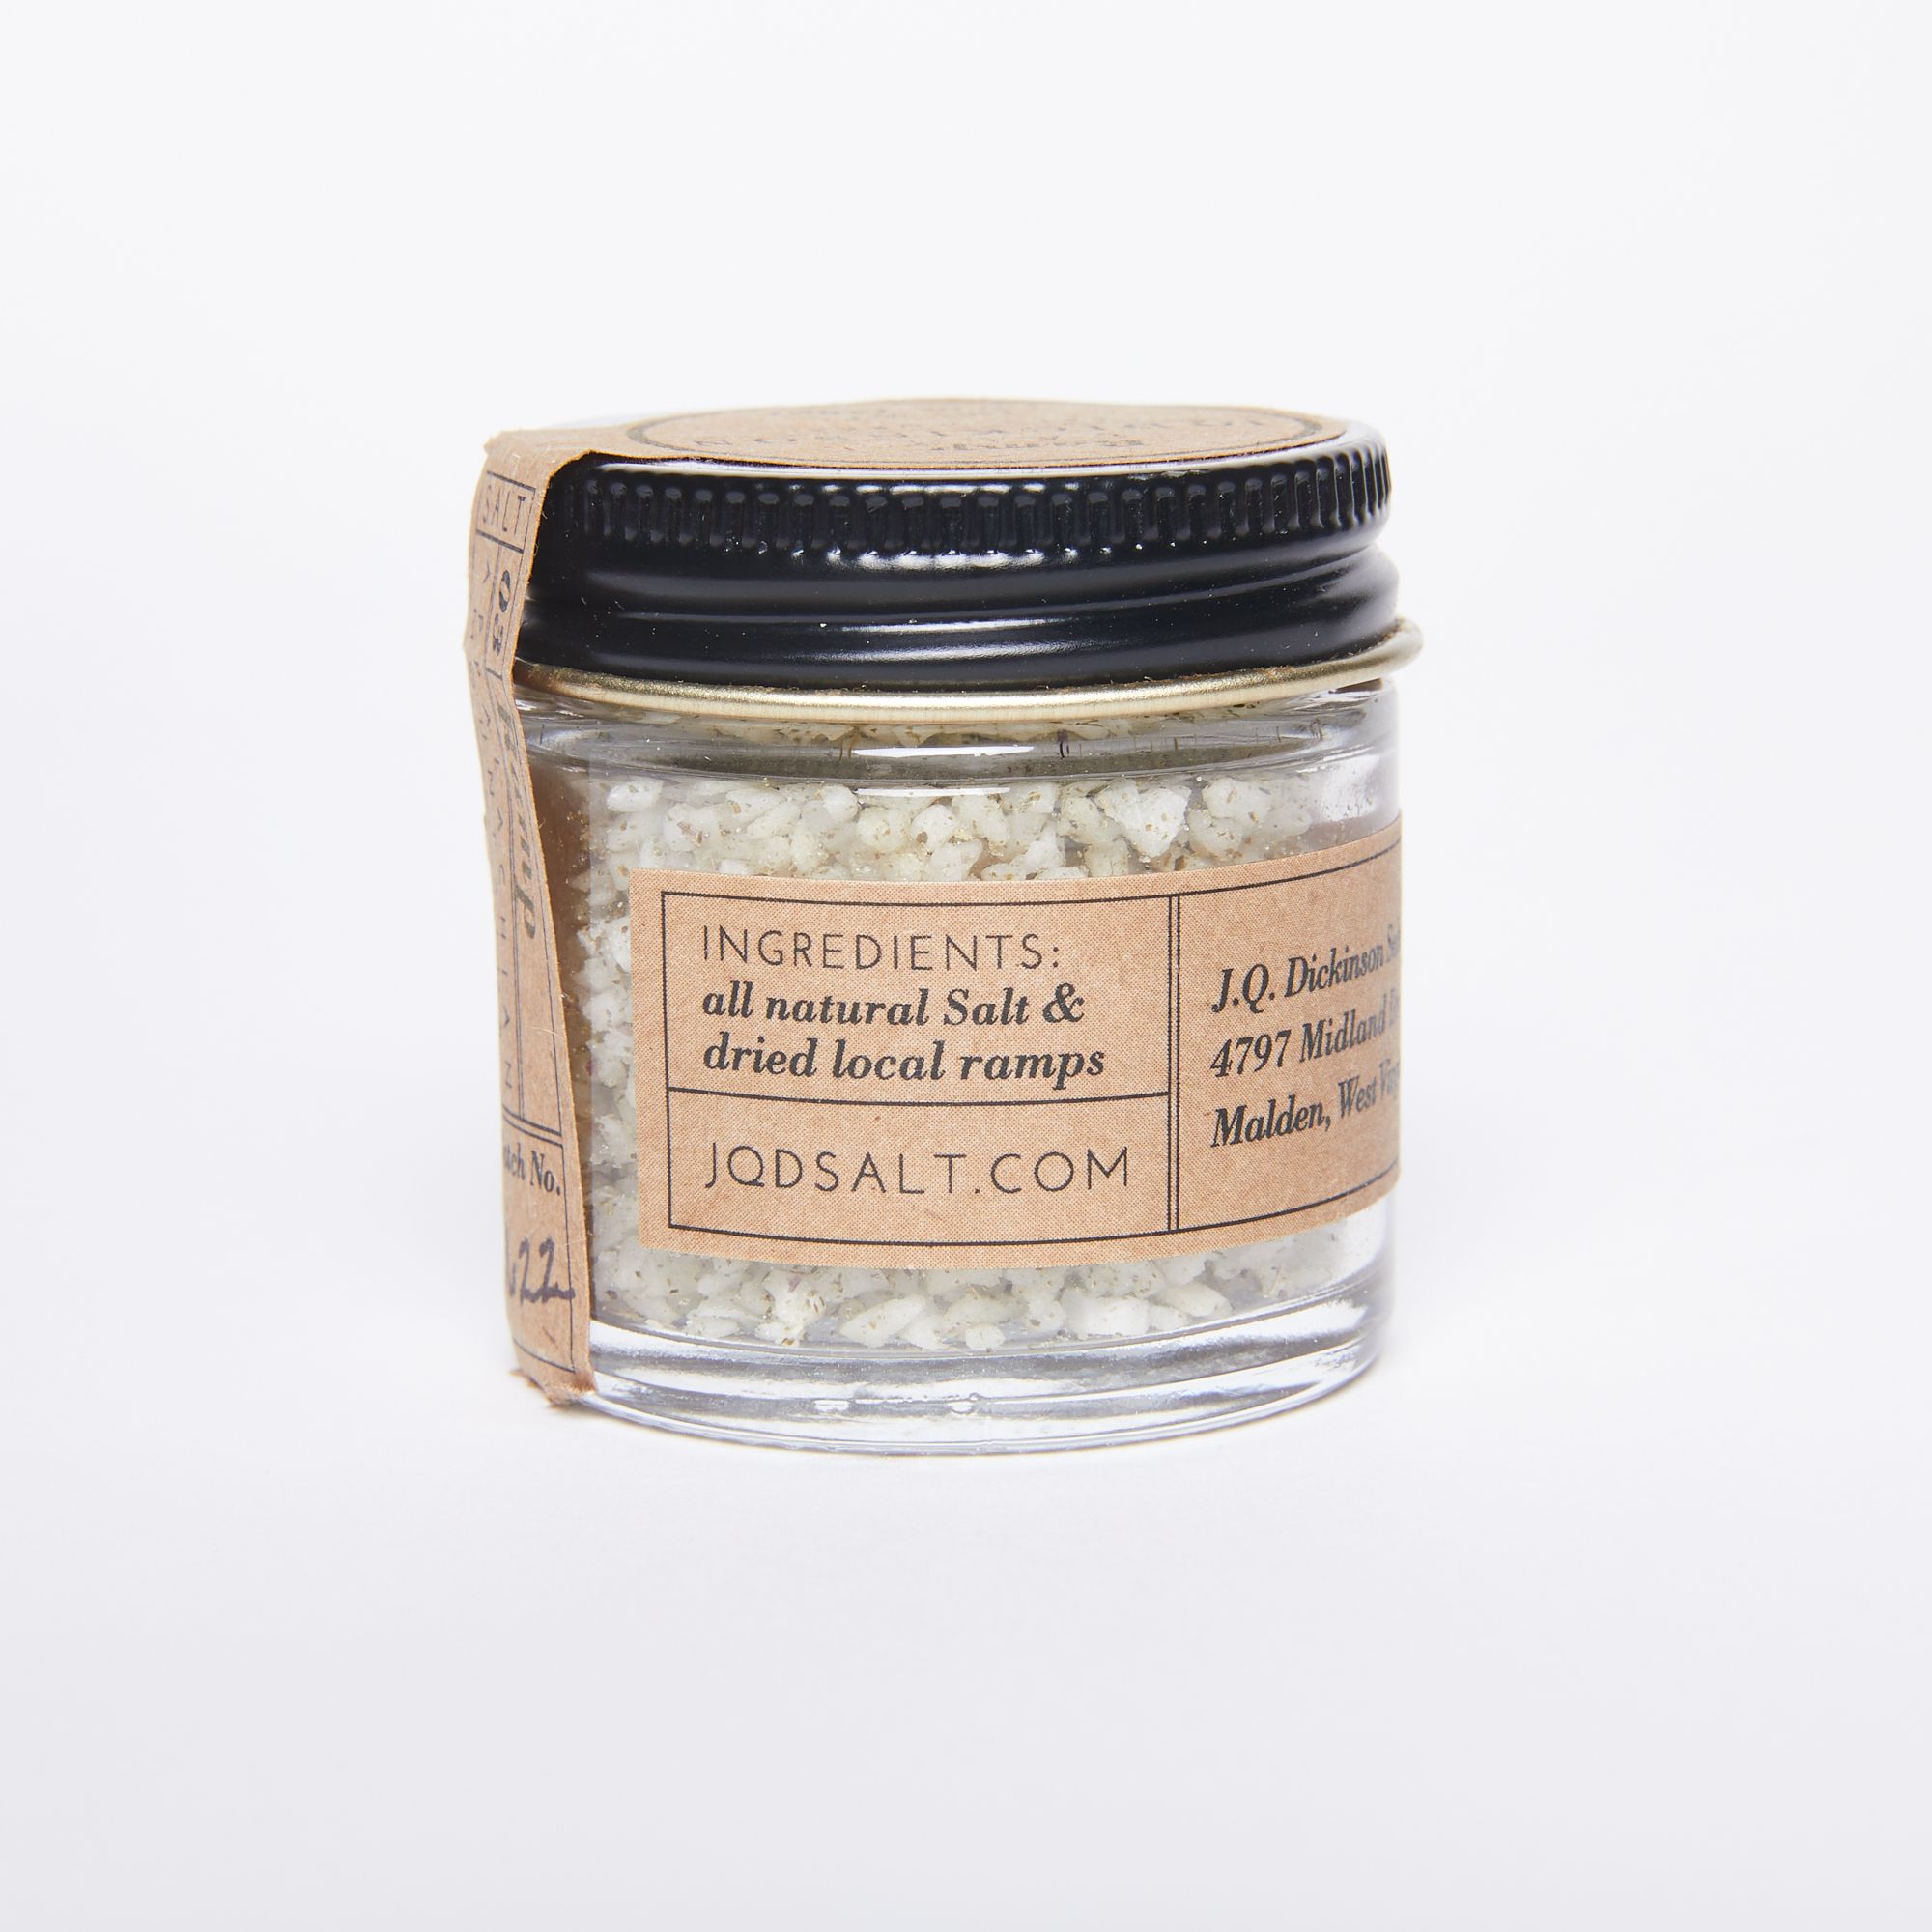 Round glass jar full of large salt crystals with a black screw lid and a natural color label with a list of ingredients: all natural salt, dried local ramps